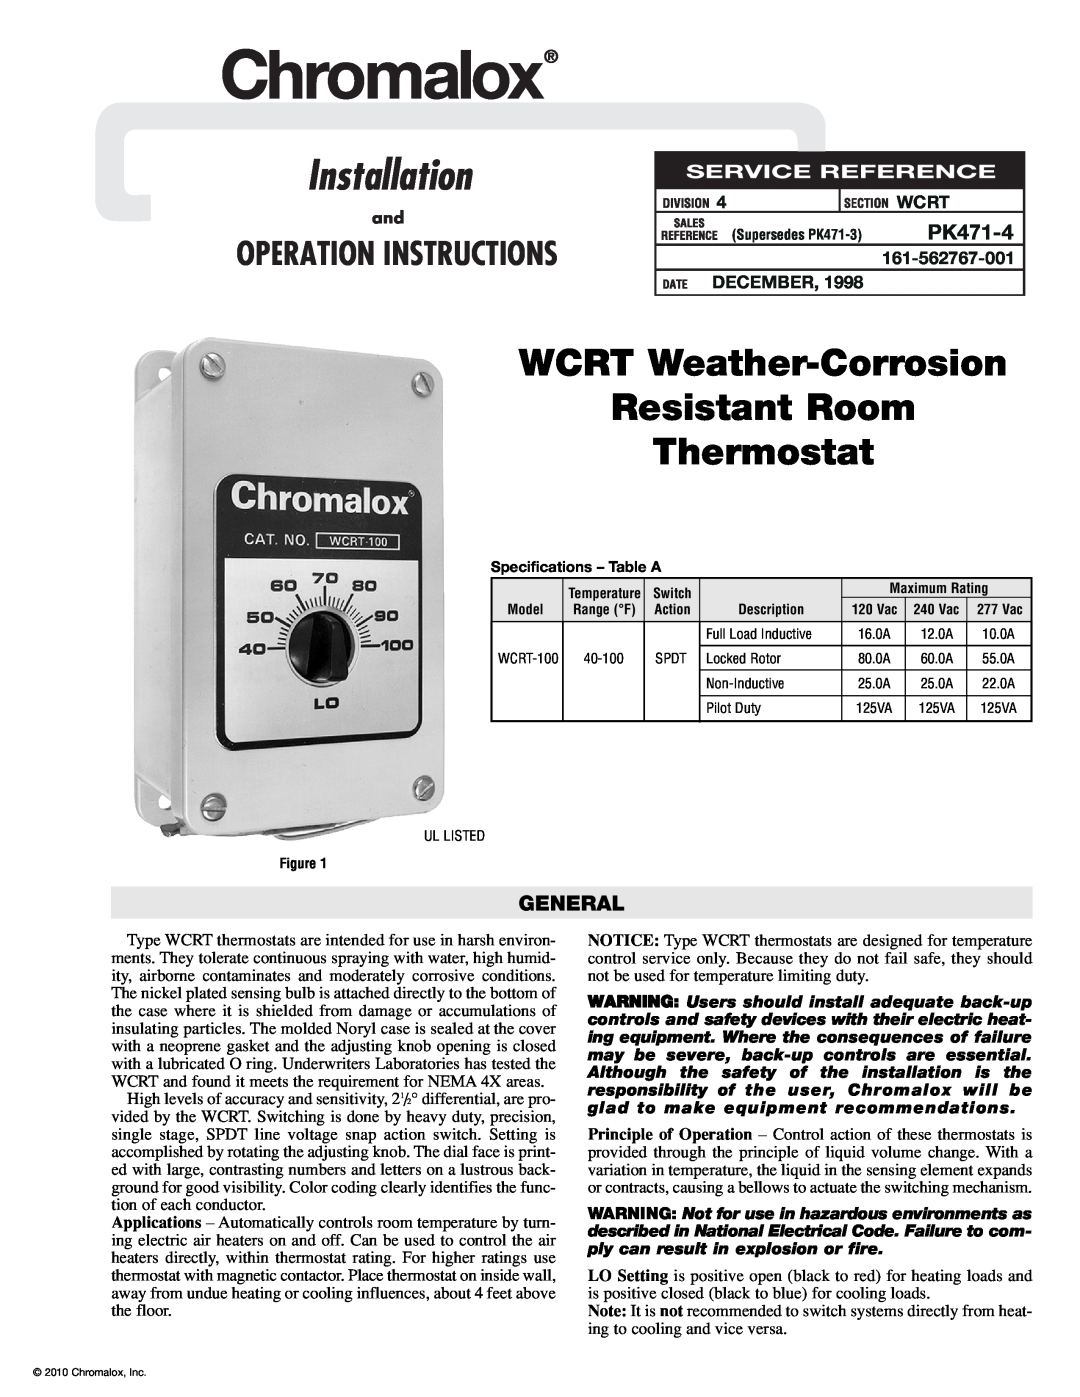 Chromalox PK471-4 specifications General, Wcrt, December, Installation, WCRT Weather-Corrosion Resistant Room Thermostat 